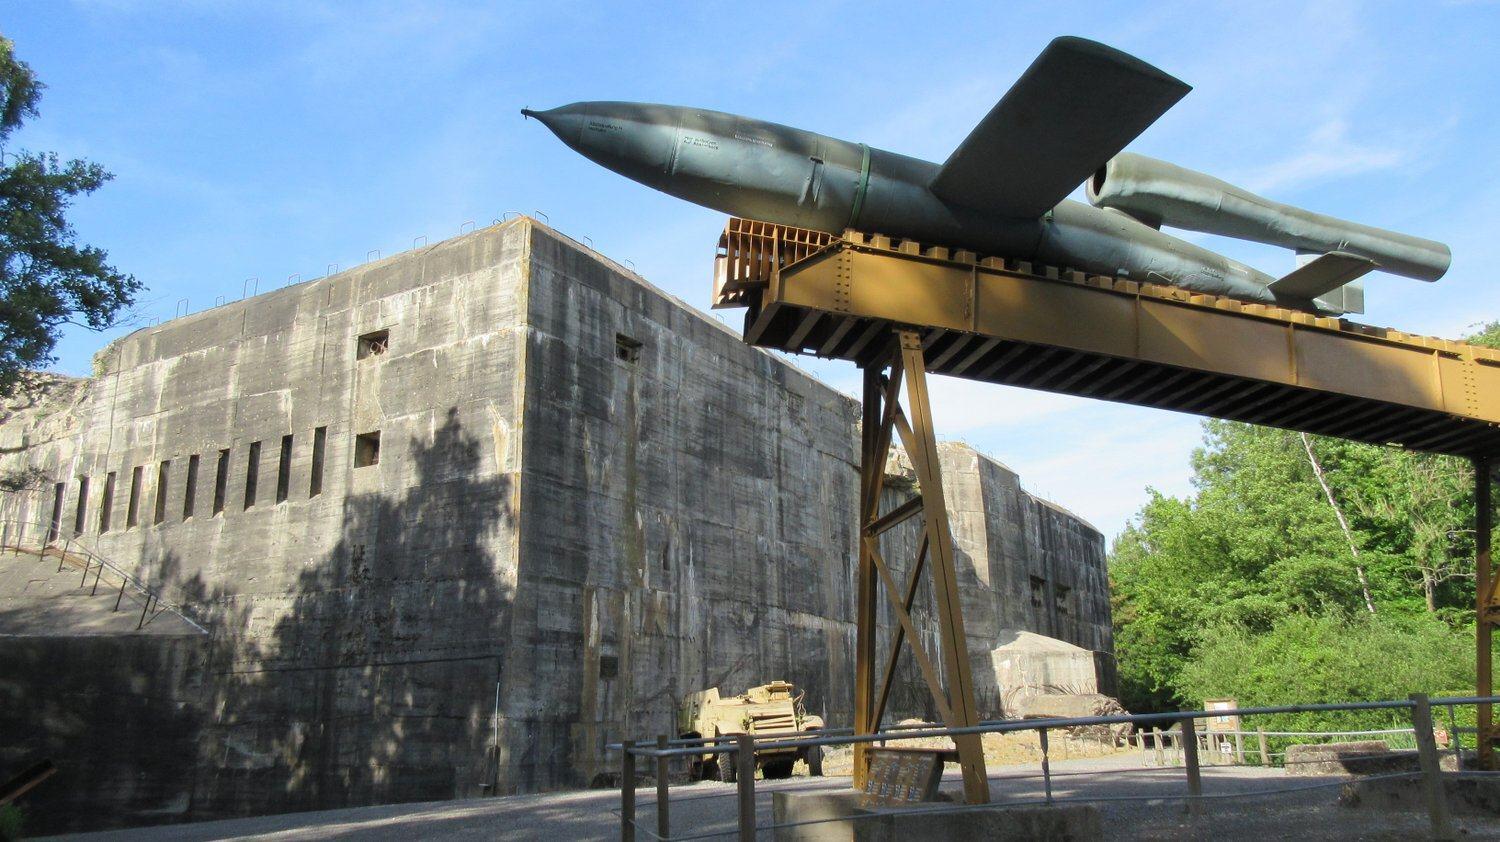 A V1 Flying Bomb on its launch ramp in the foreground with the massive blockhaus in the background